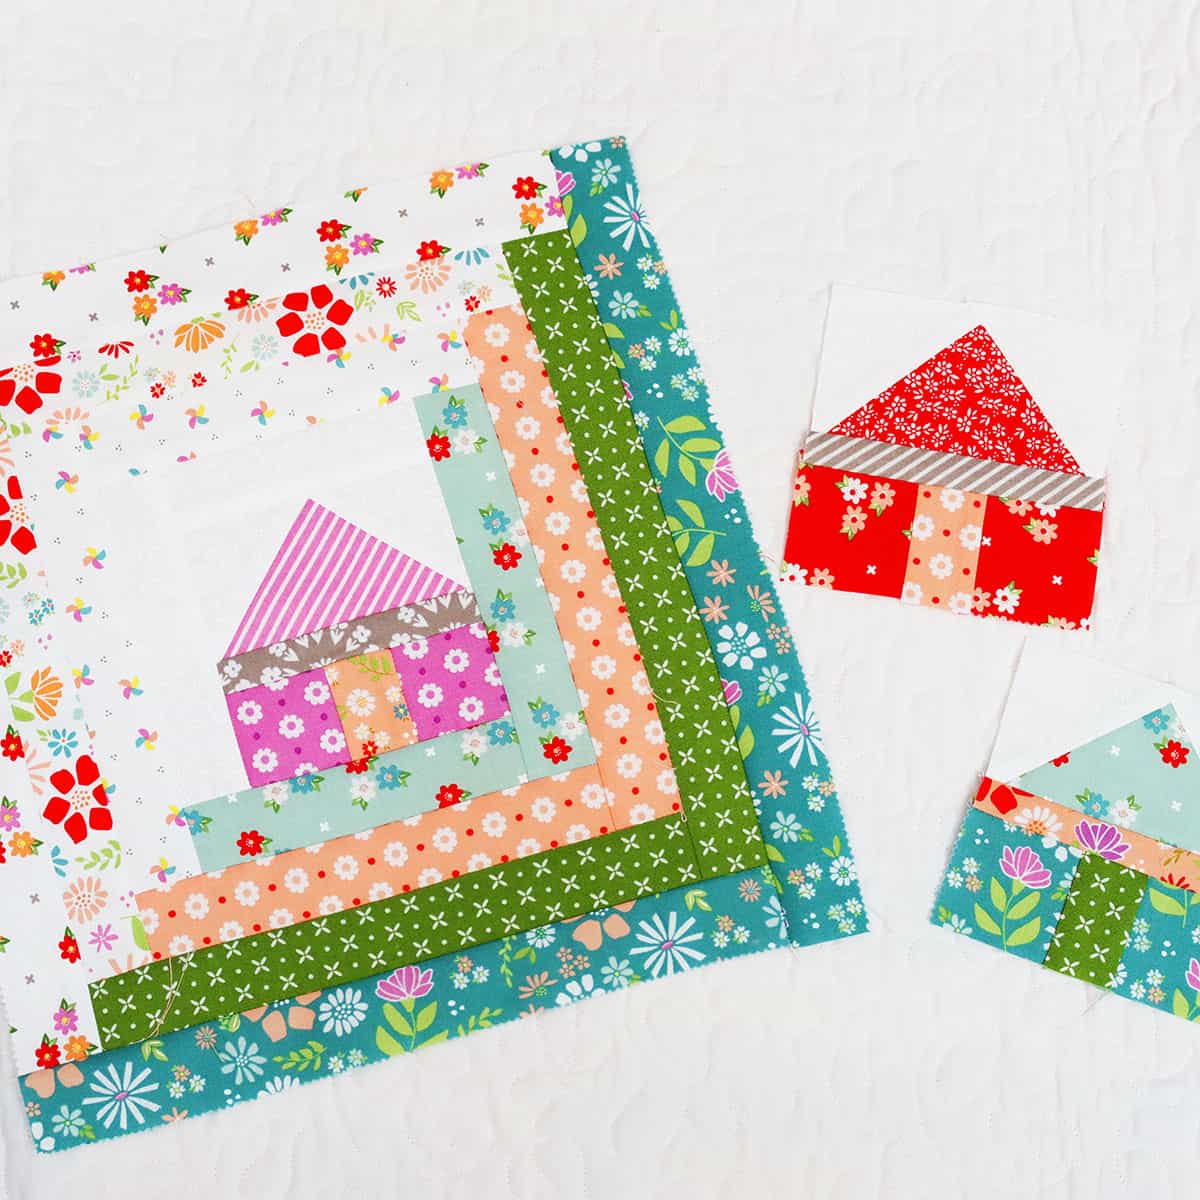 Log cabin quilt block with house center and small house blocks.